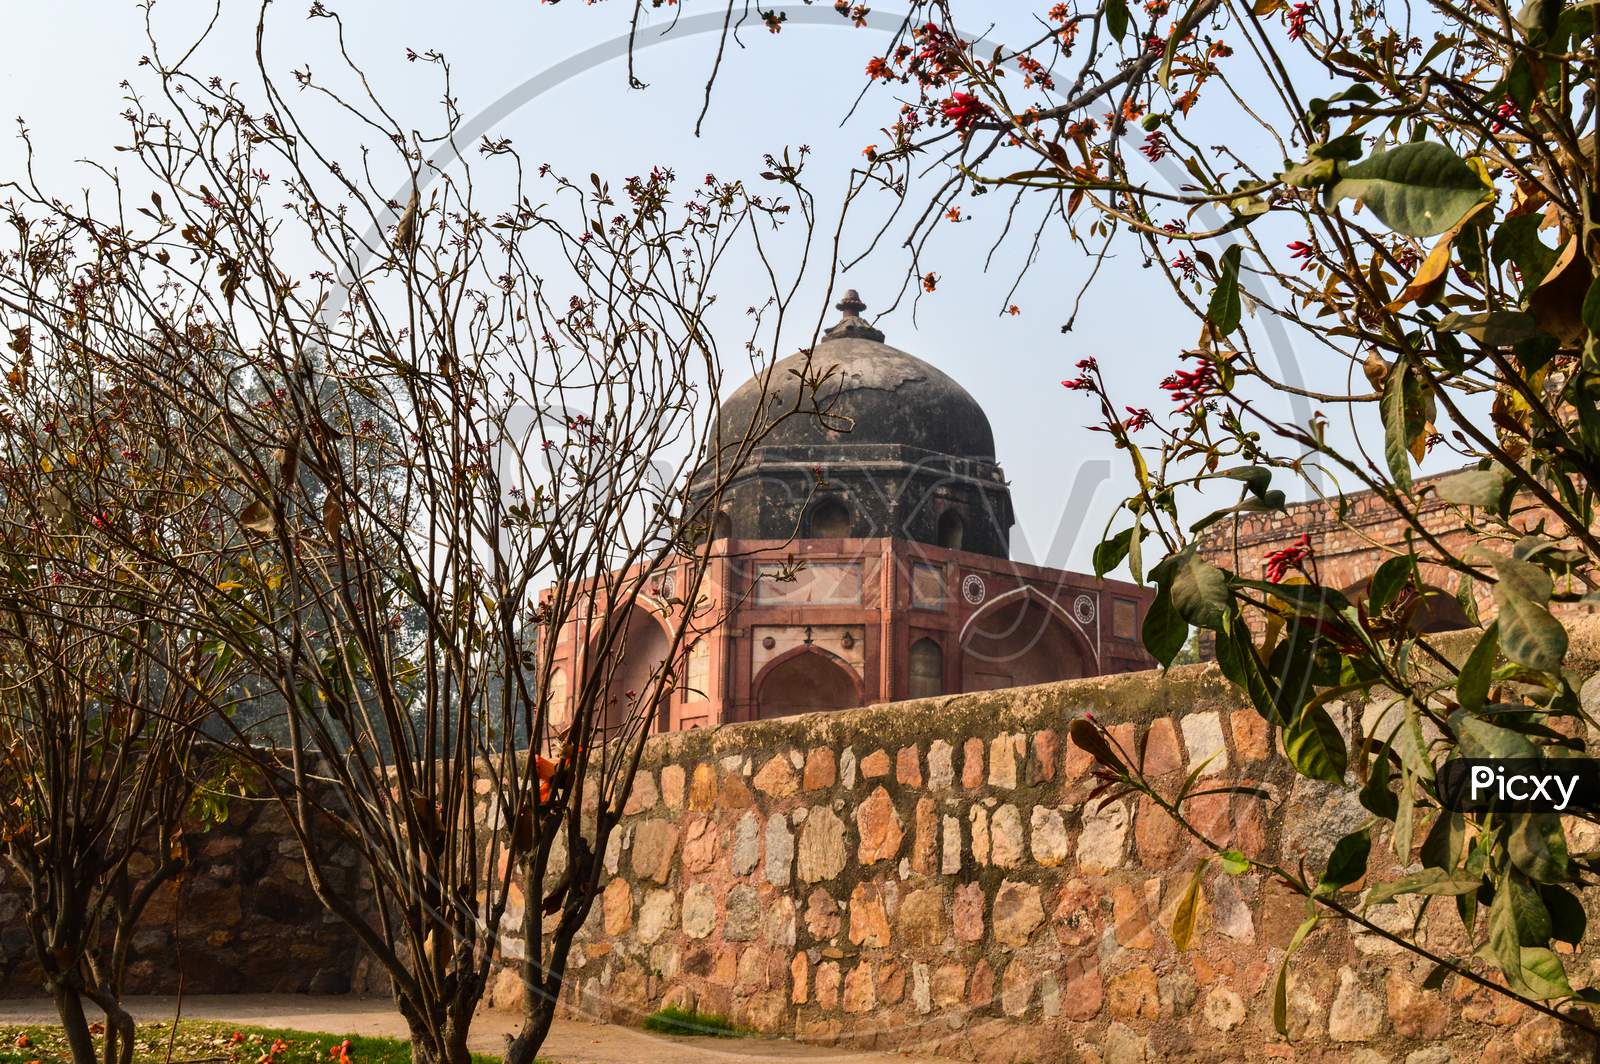 A Tree Branch Create Some Dramatic View Of Monument At Humayun Tomb Memorial From The Side Of The Lawn At Winter Foggy Morning.